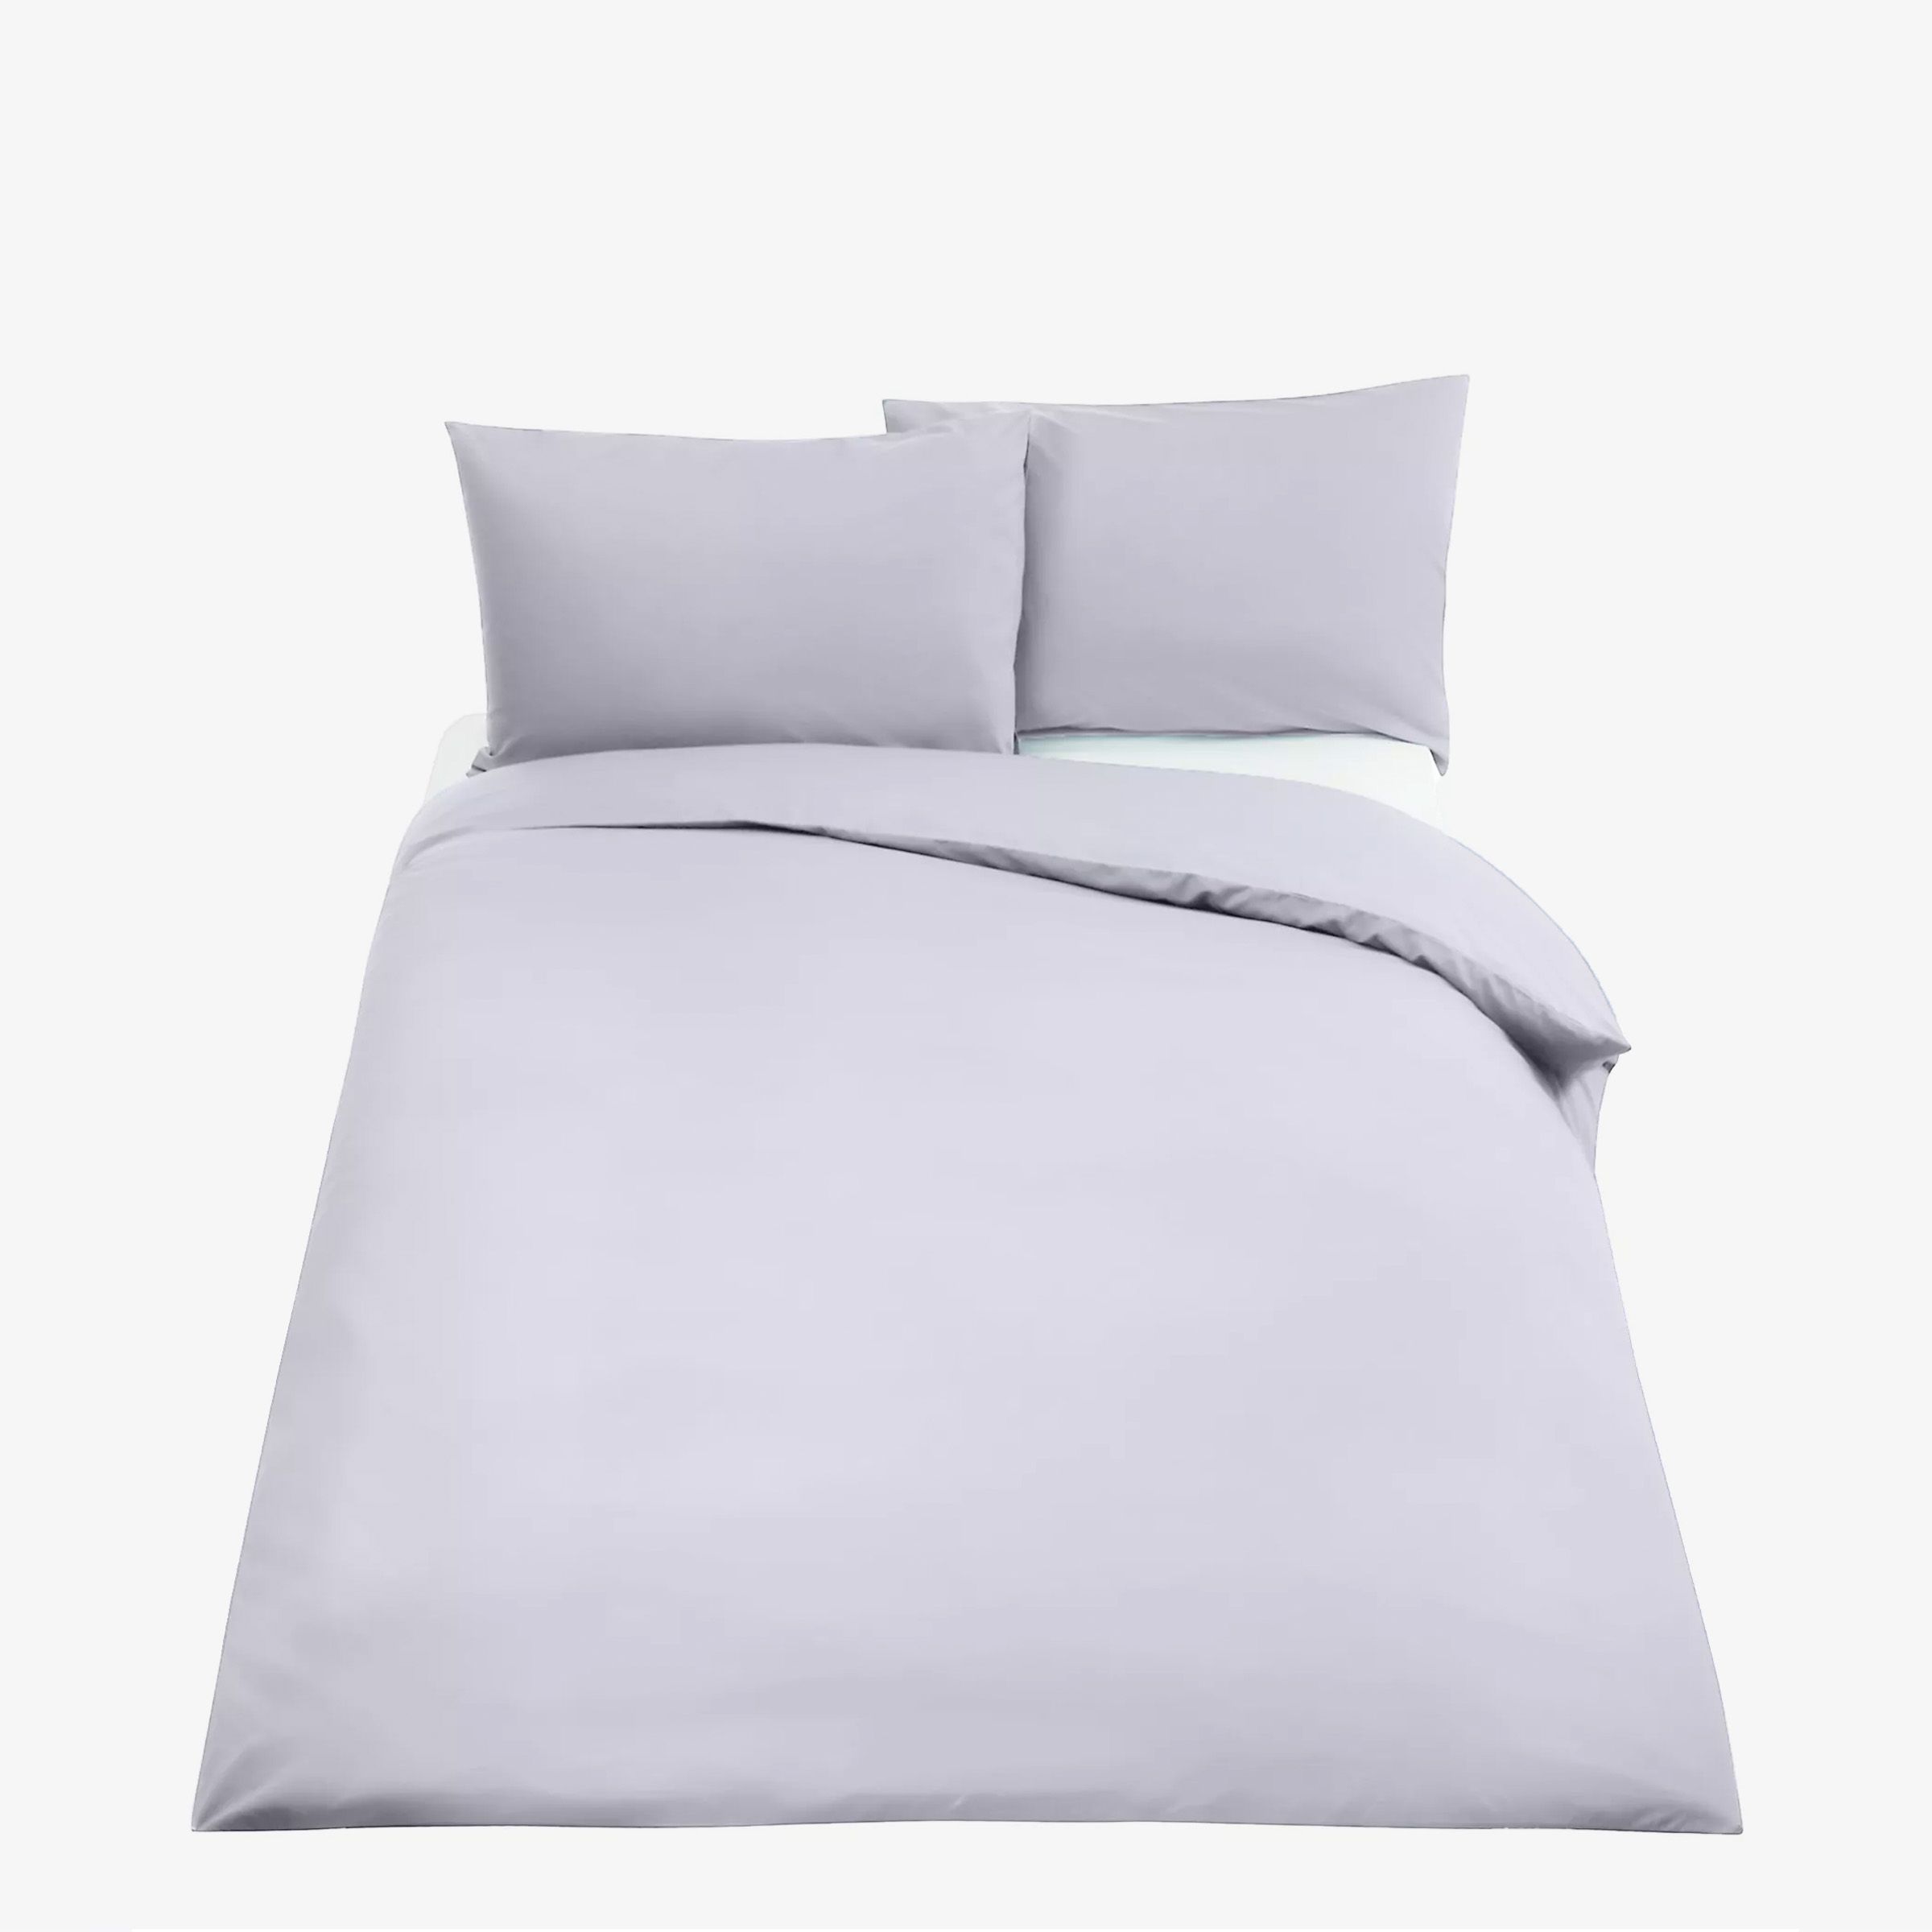 ANYDAY John Lewis & Partners Easy Care 200 Thread Count Polycotton Duvet Cover, Single